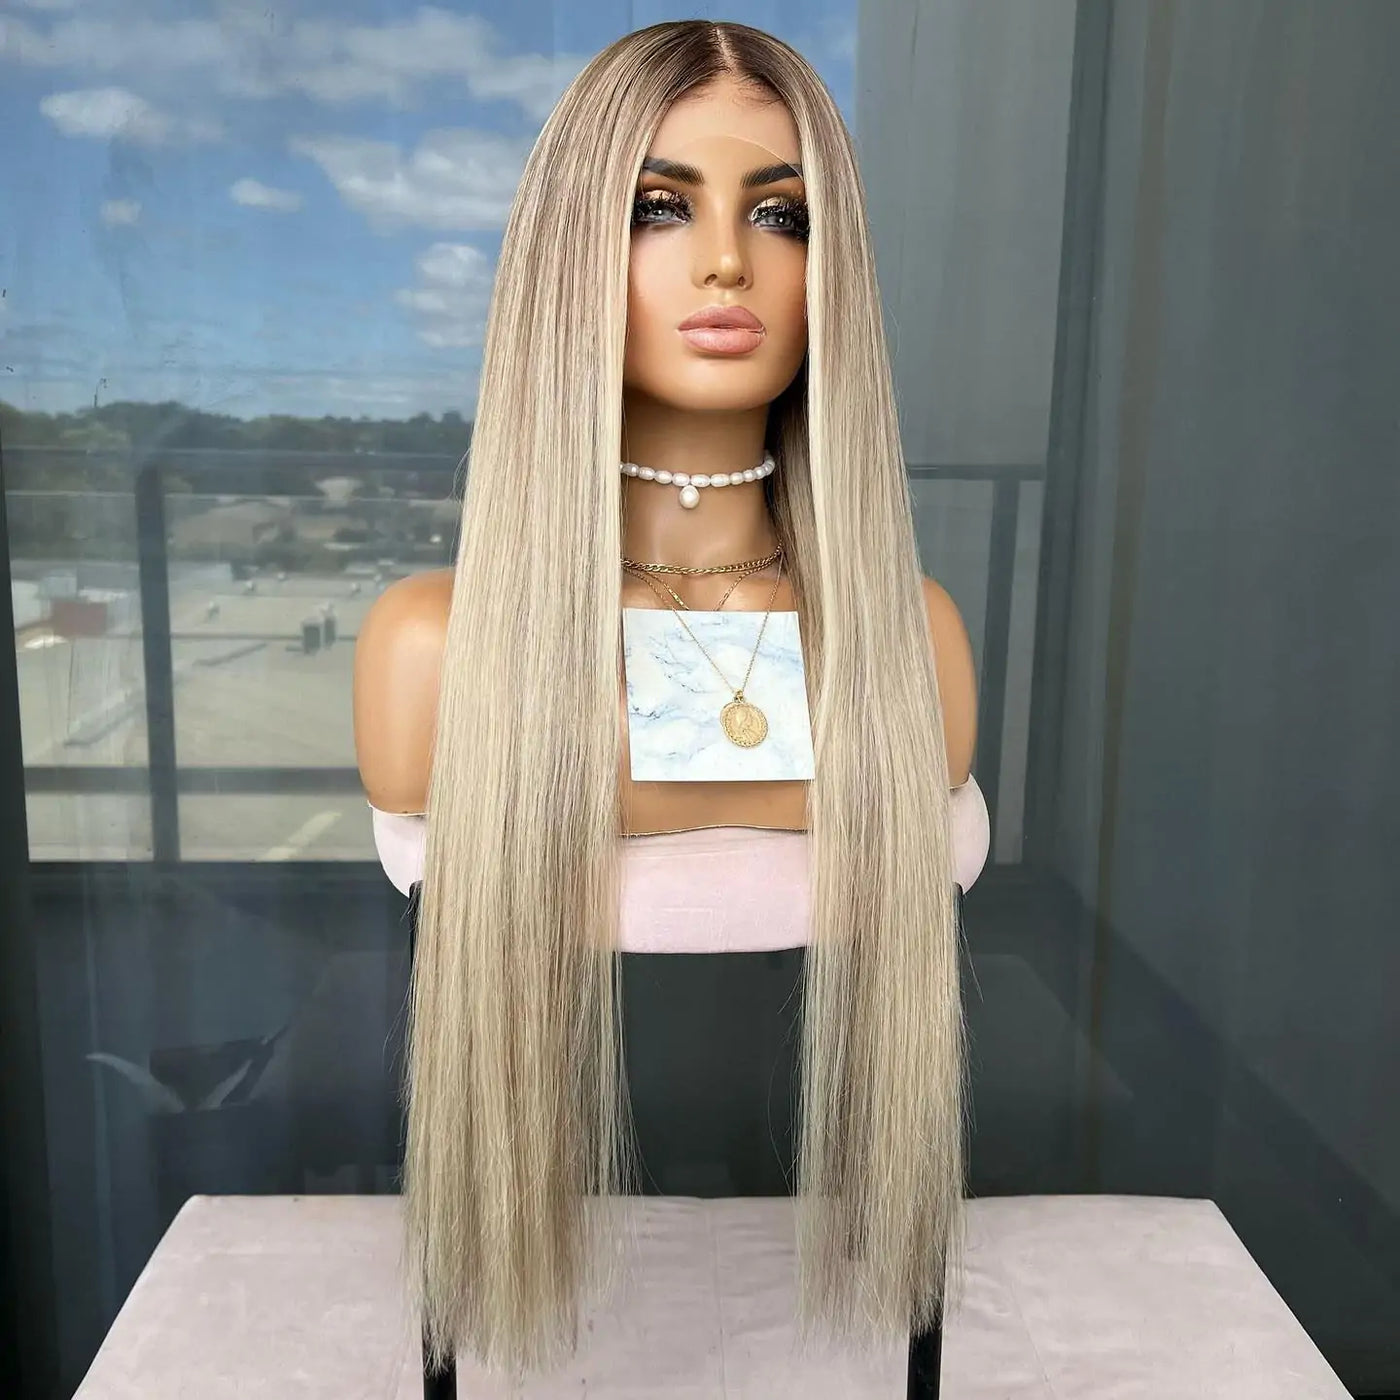 Highlight Ash Blonde Human Hair Wig Straight 13x4 Lace Front Ash Blonde Wig with Dark Roots Pre Plucked